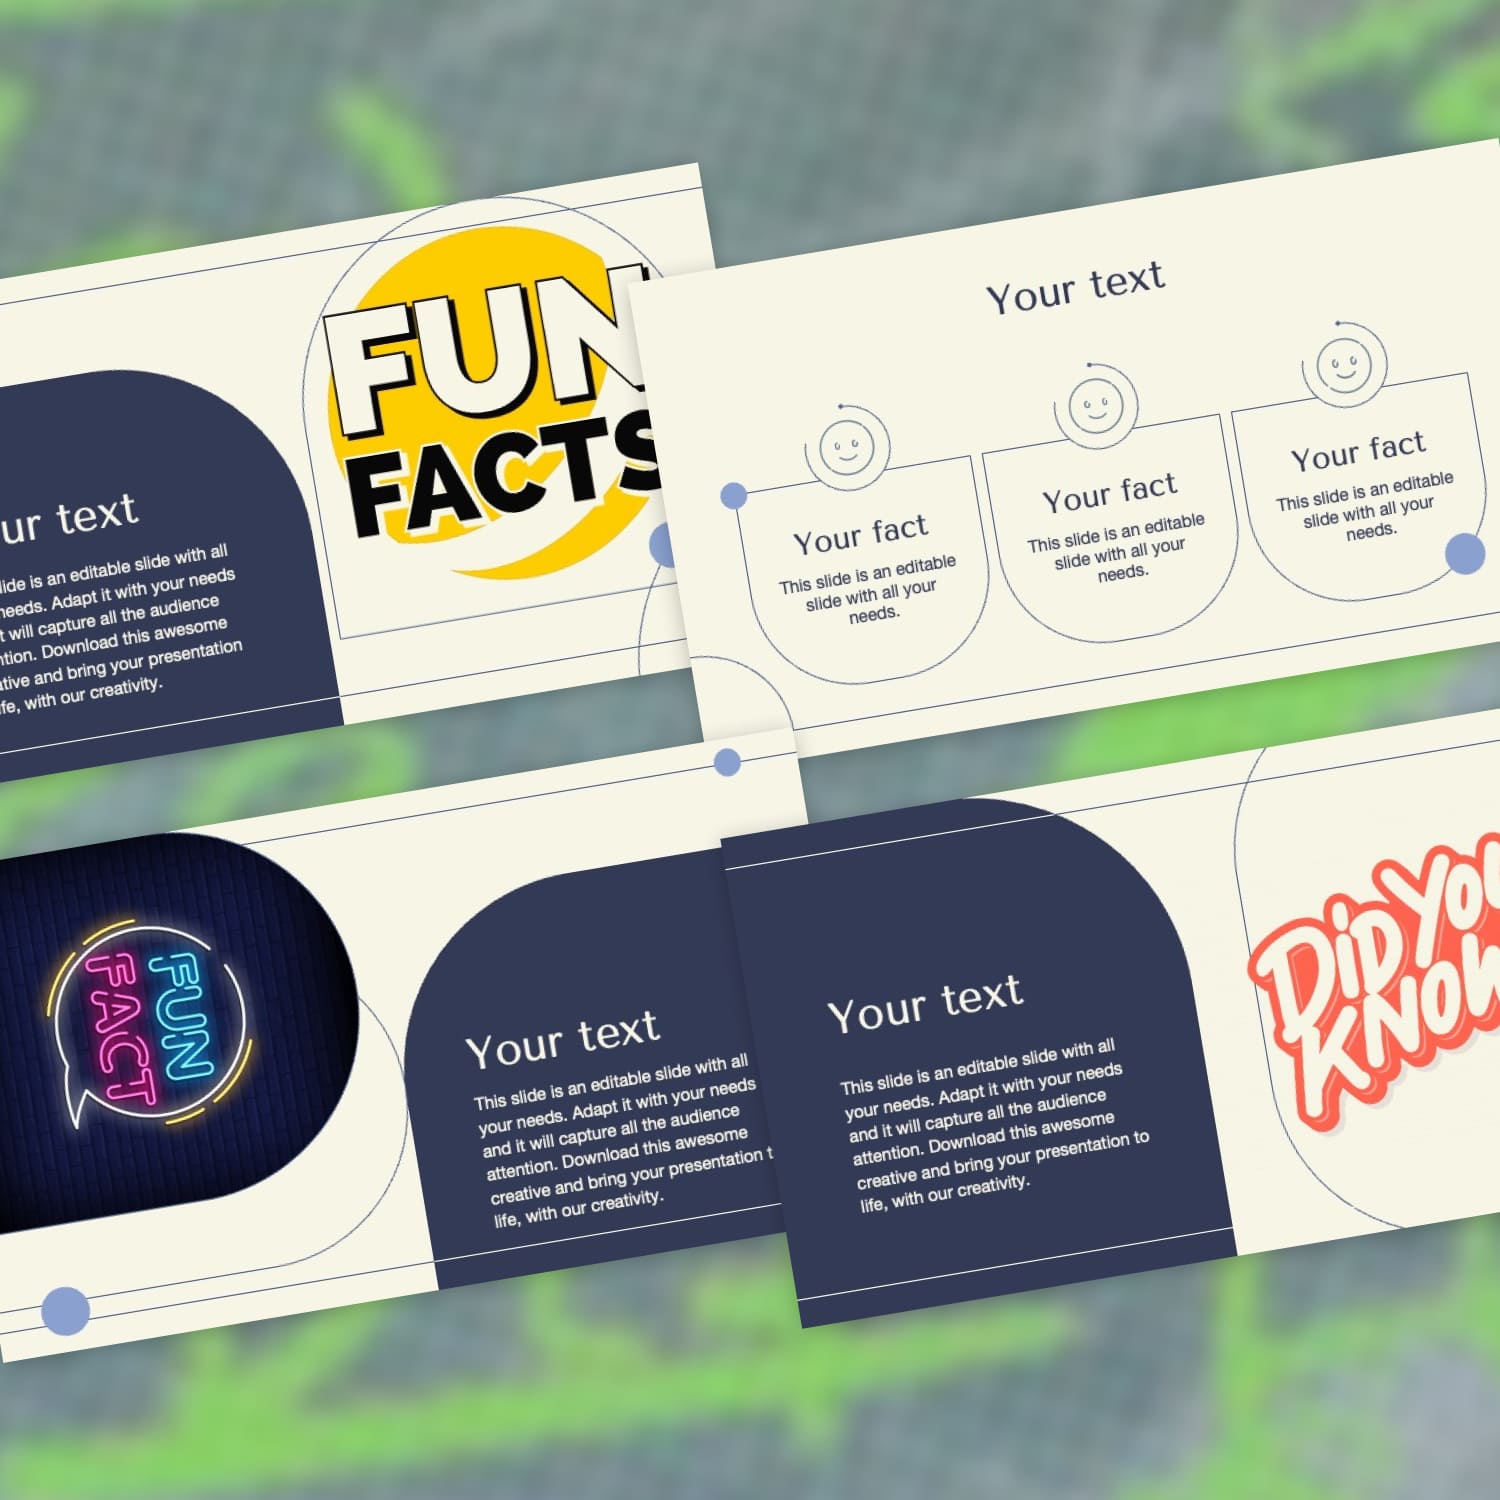 Fun Facts Powerpoint Slides cover image.